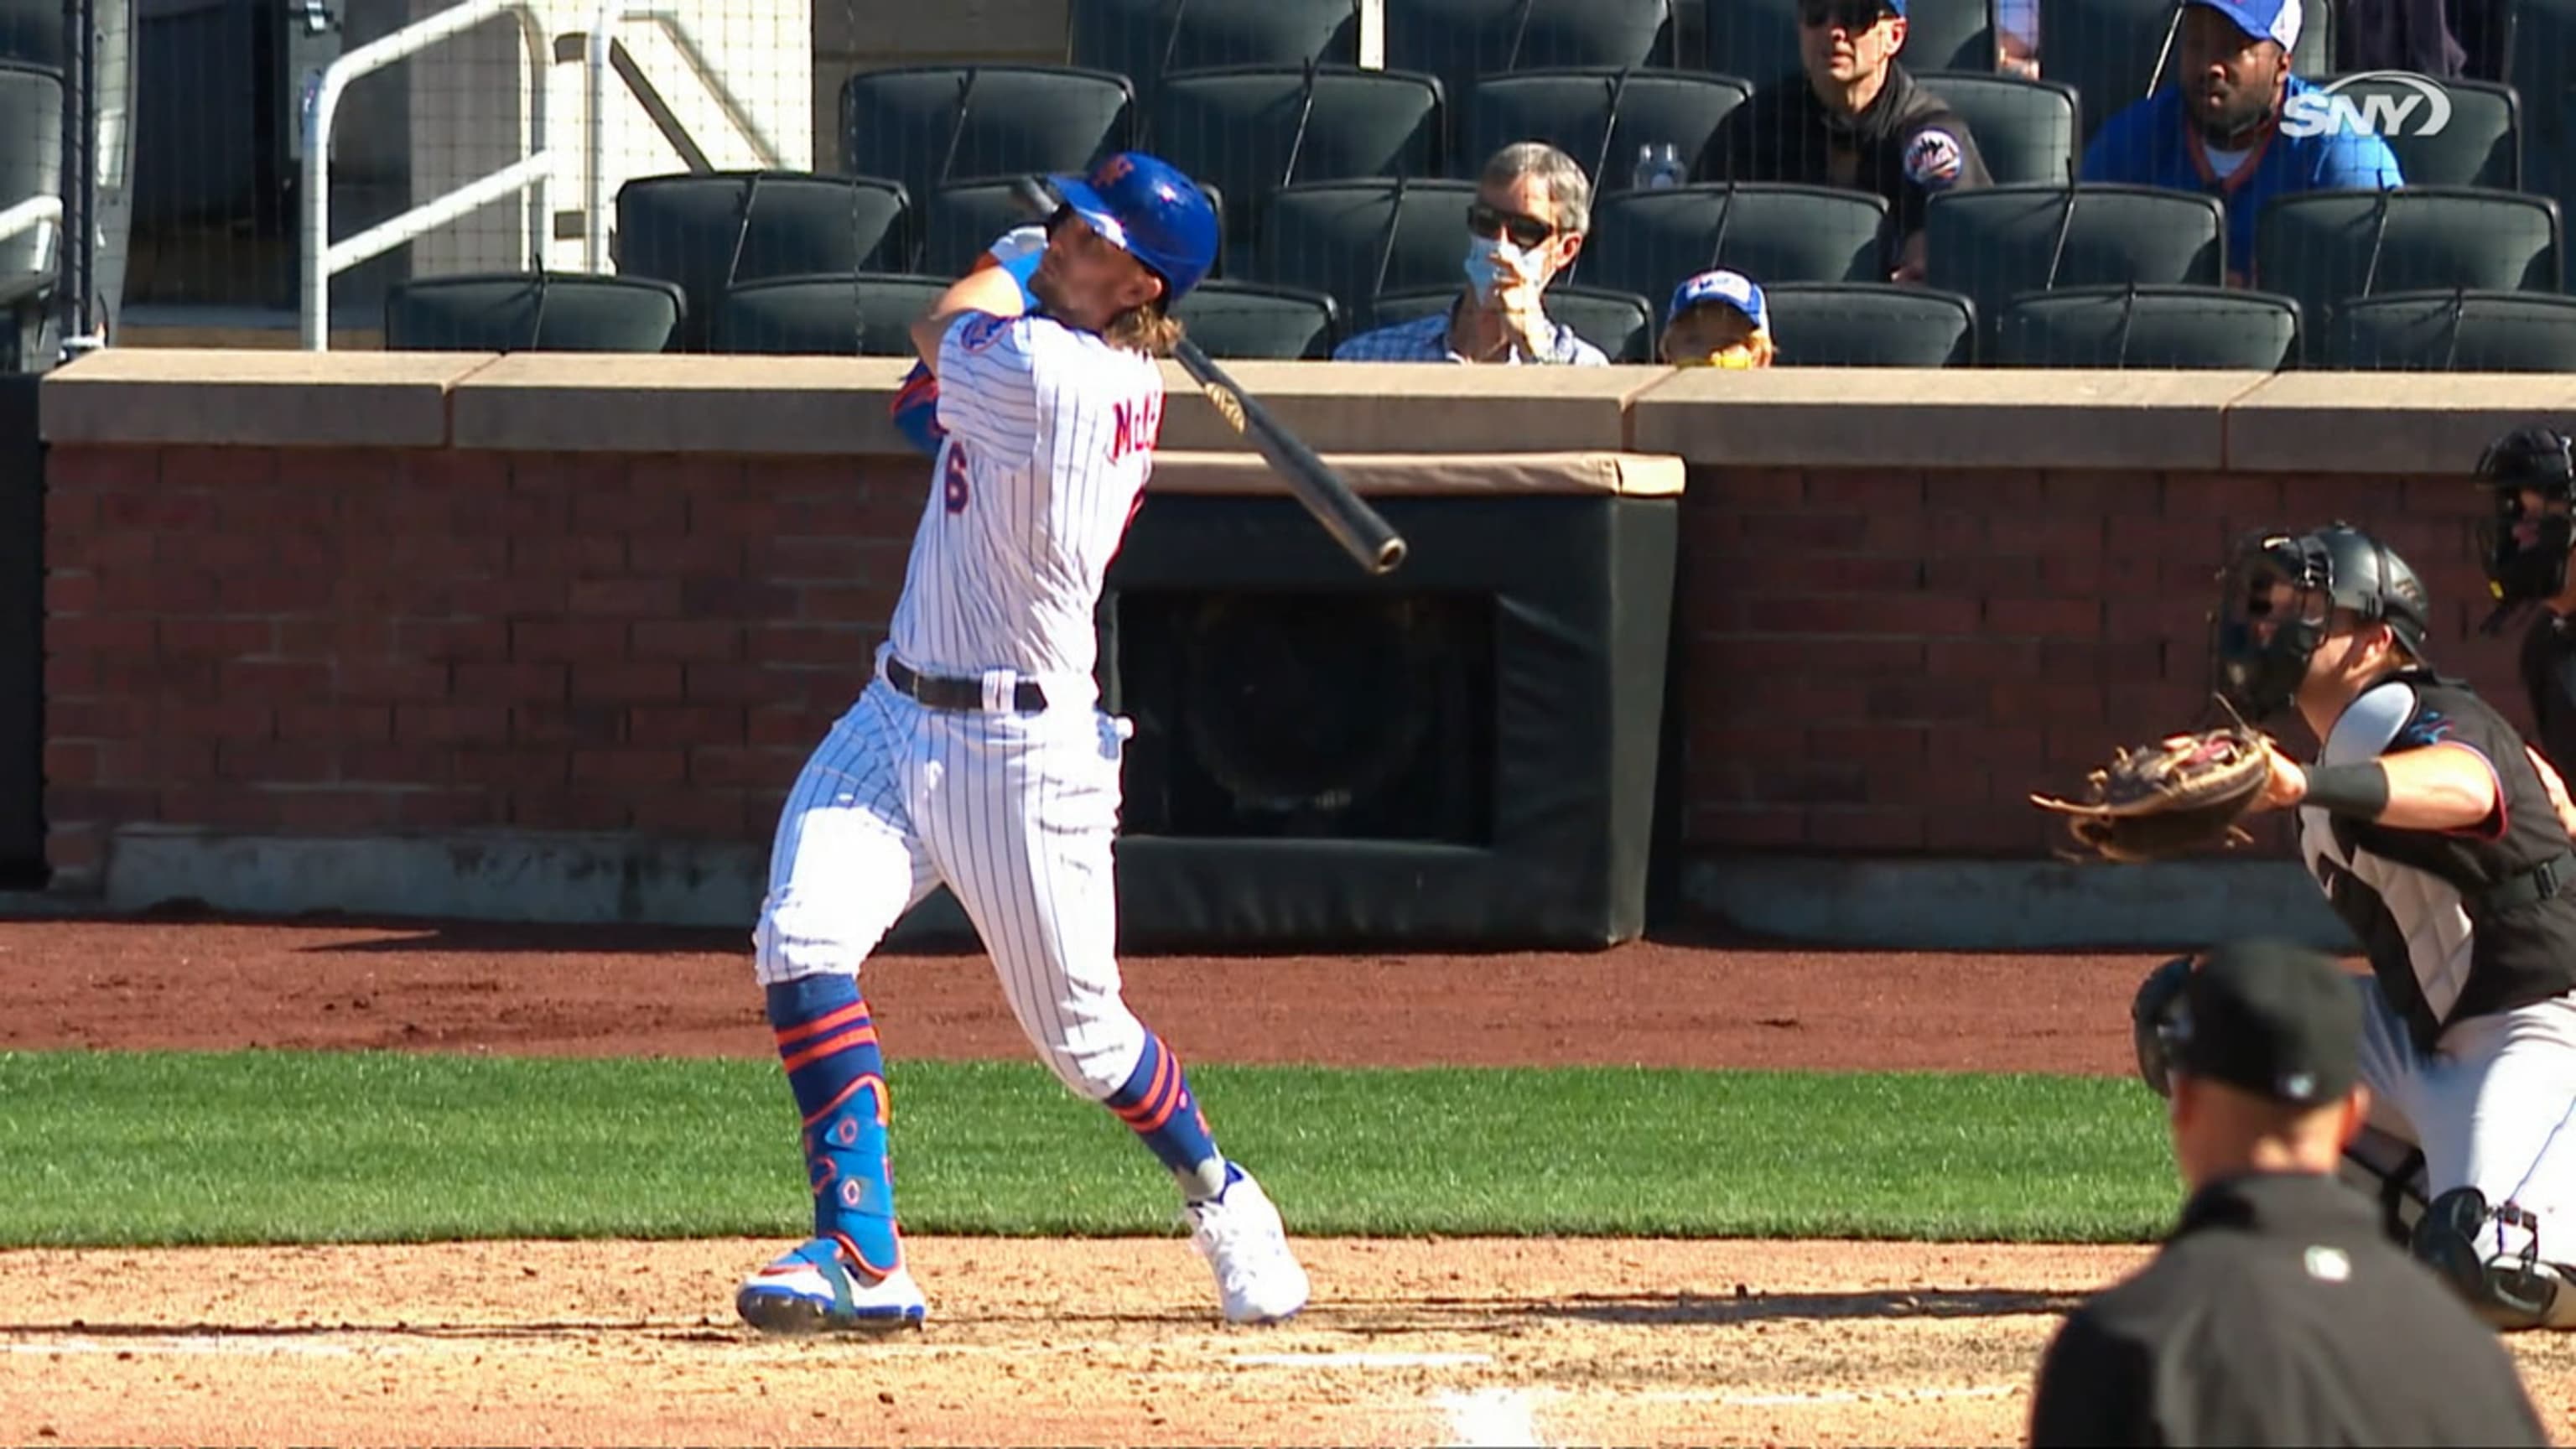 Michael Conforto Emerging as Homegrown Leader for Retooled Mets